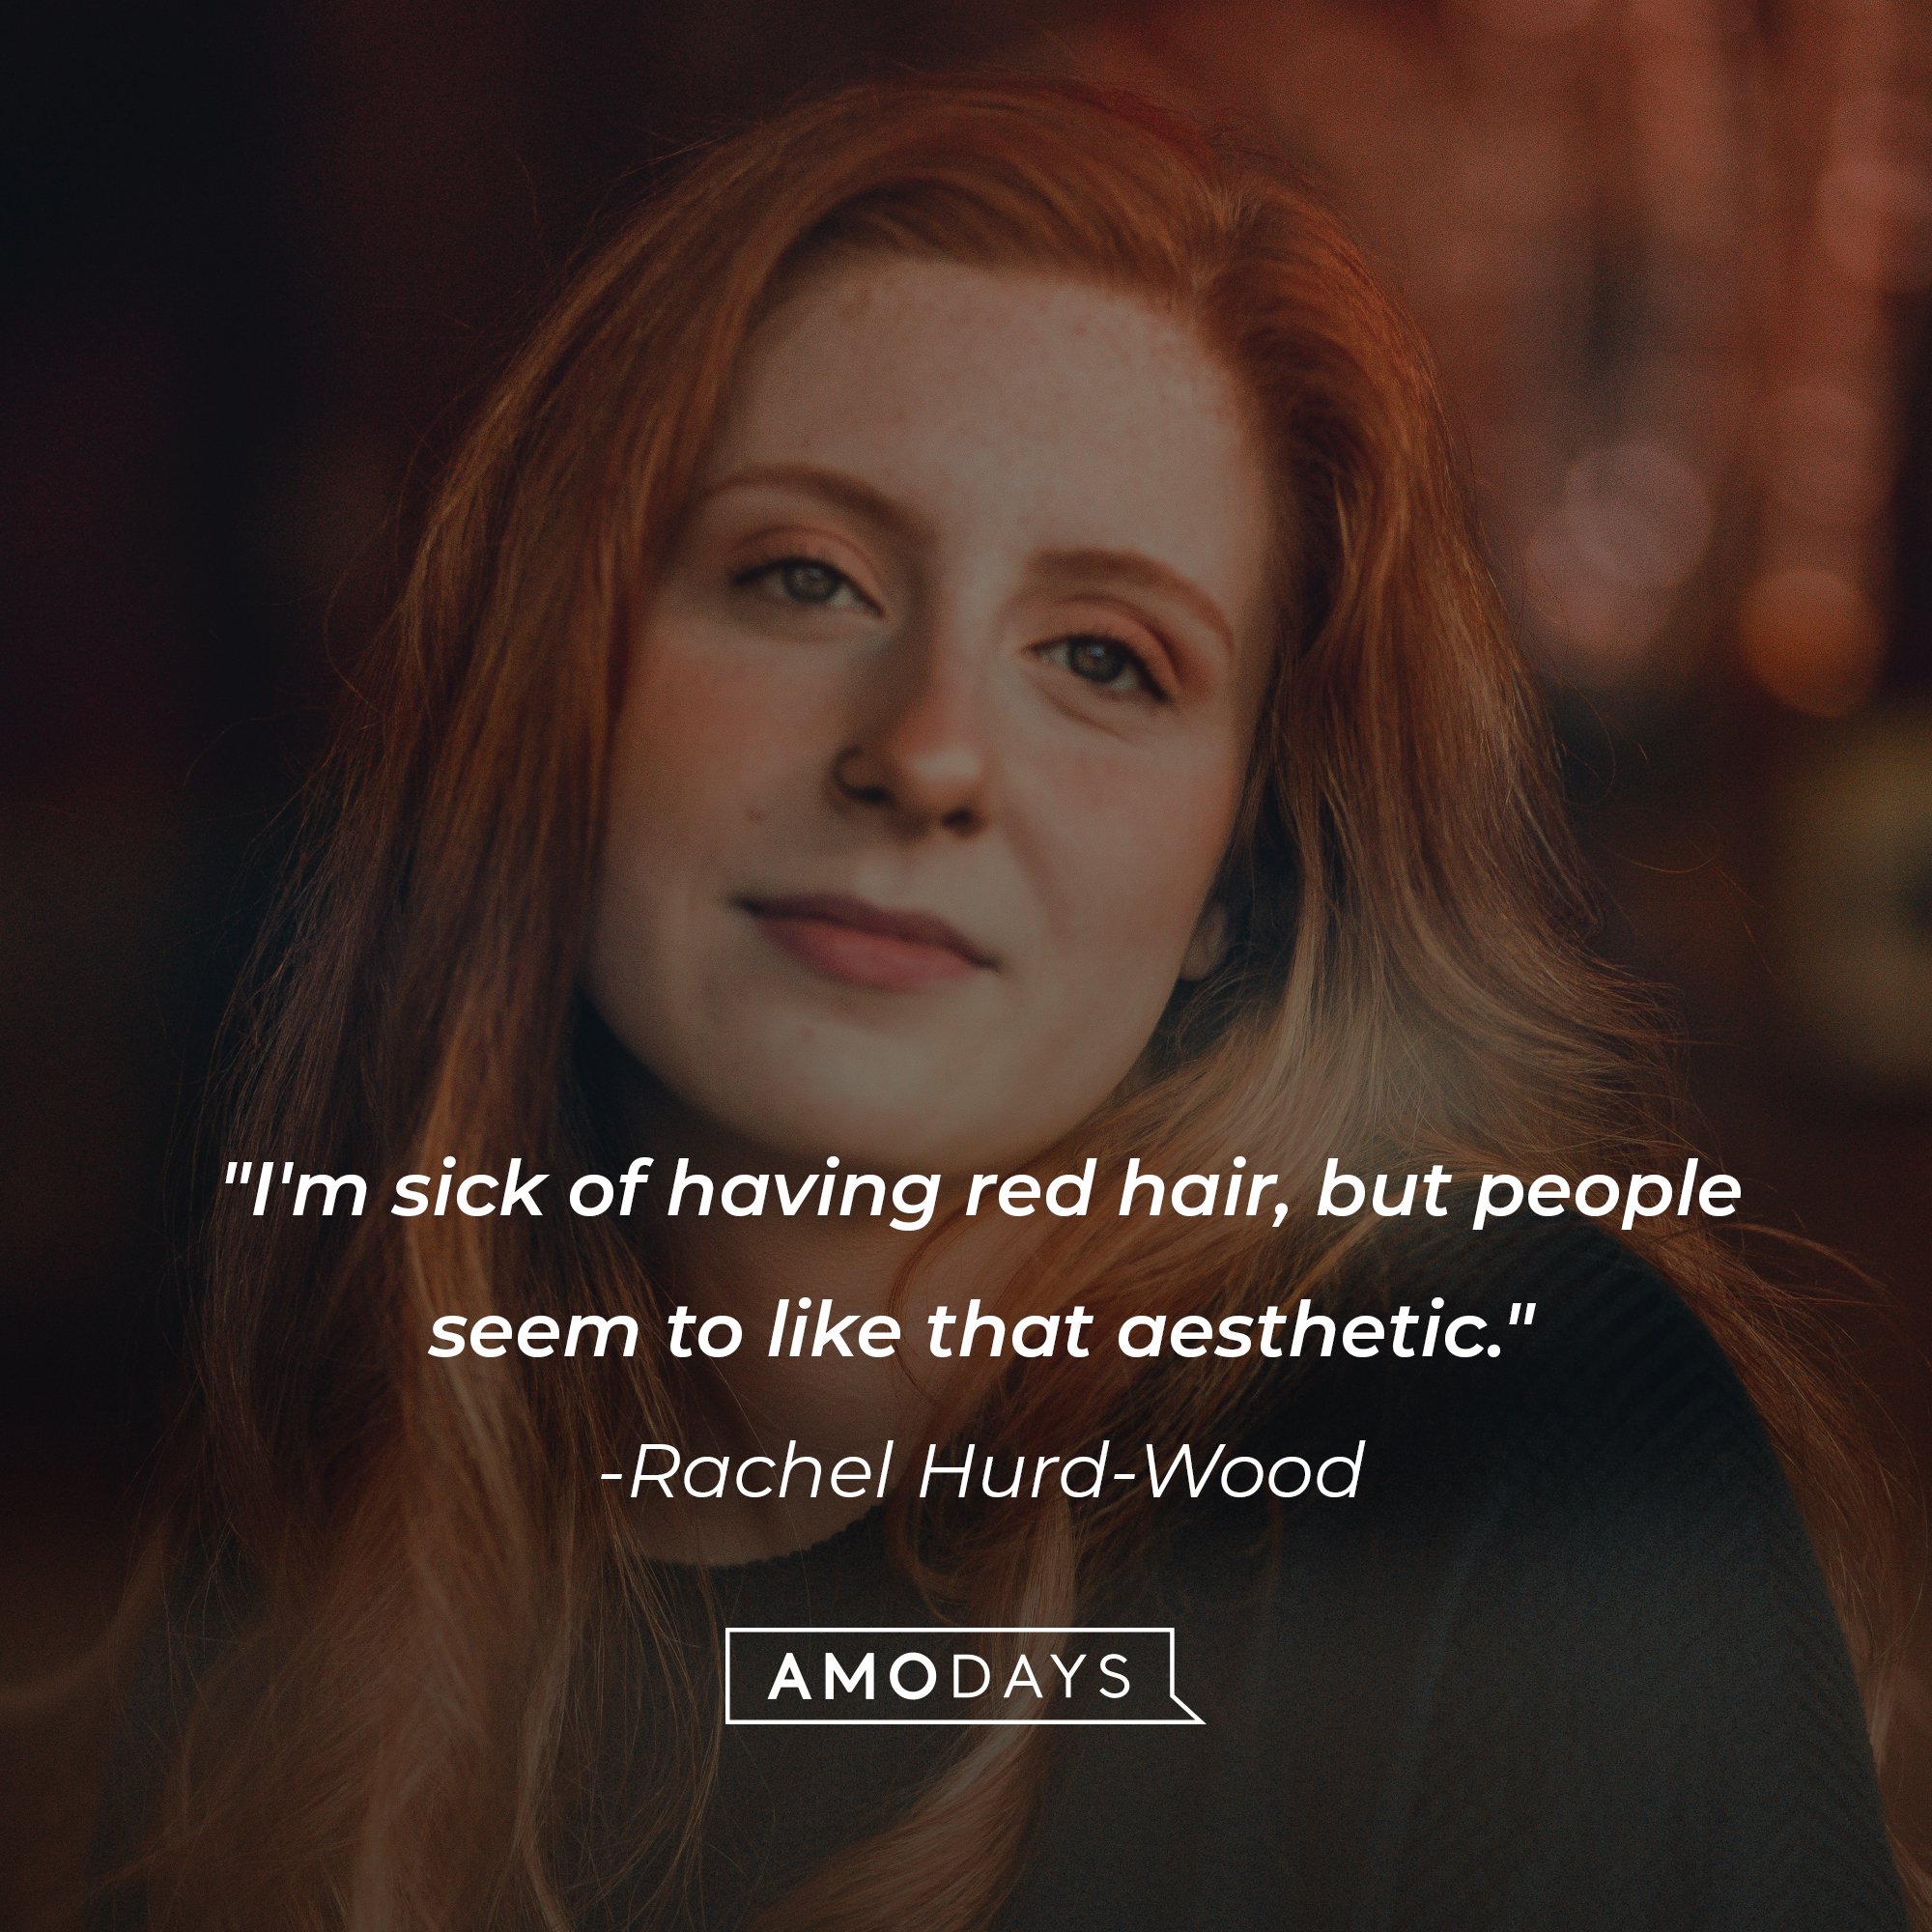 Rachel Hurd-Wood’s quote: "I'm sick of having red hair, but people seem to like that aesthetic." | Image: AmoDays